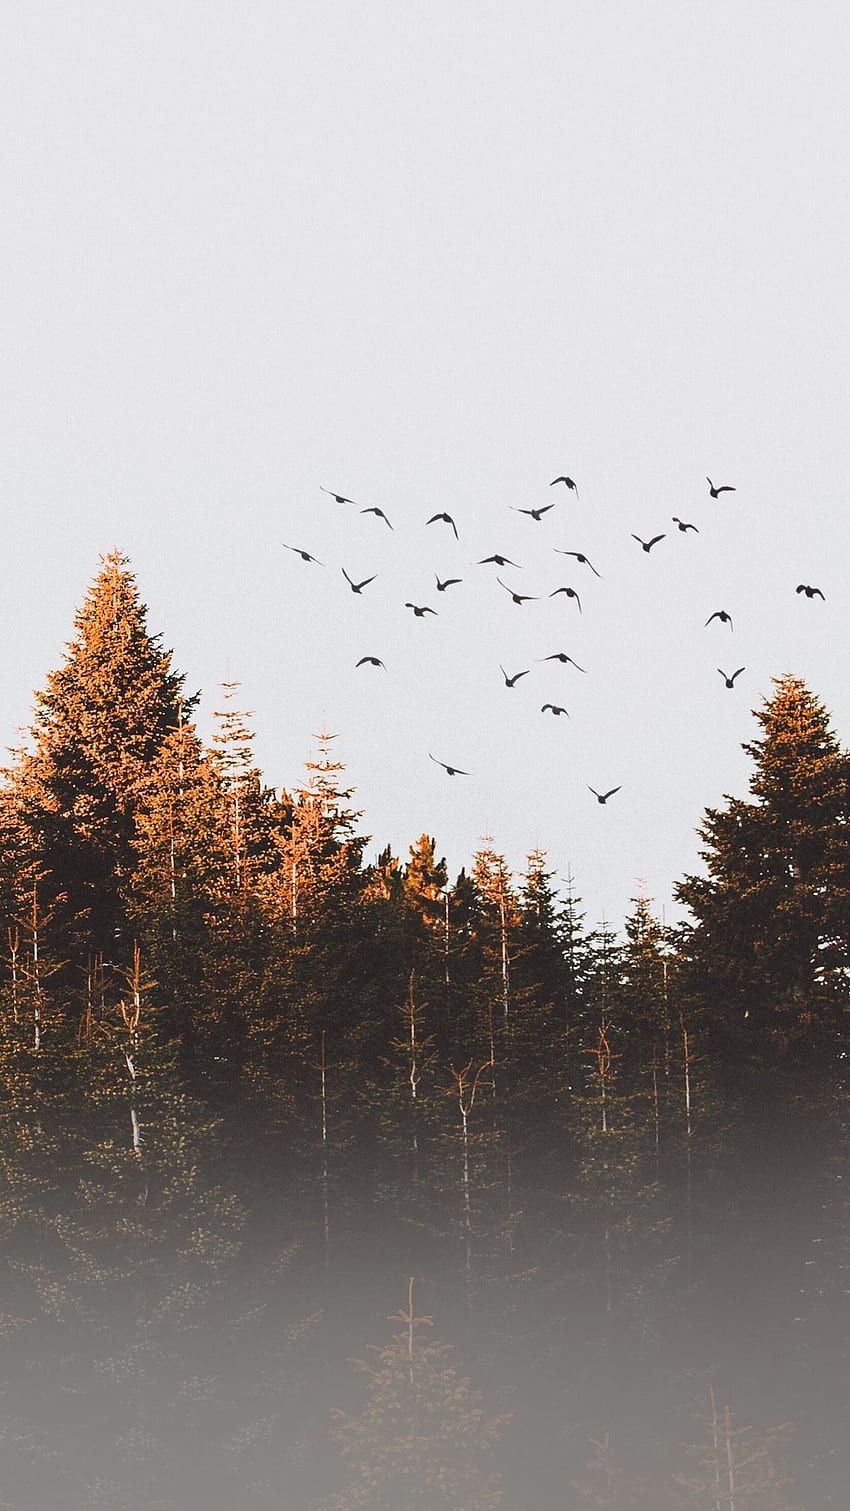 A flock of birds flying over a forest. - 